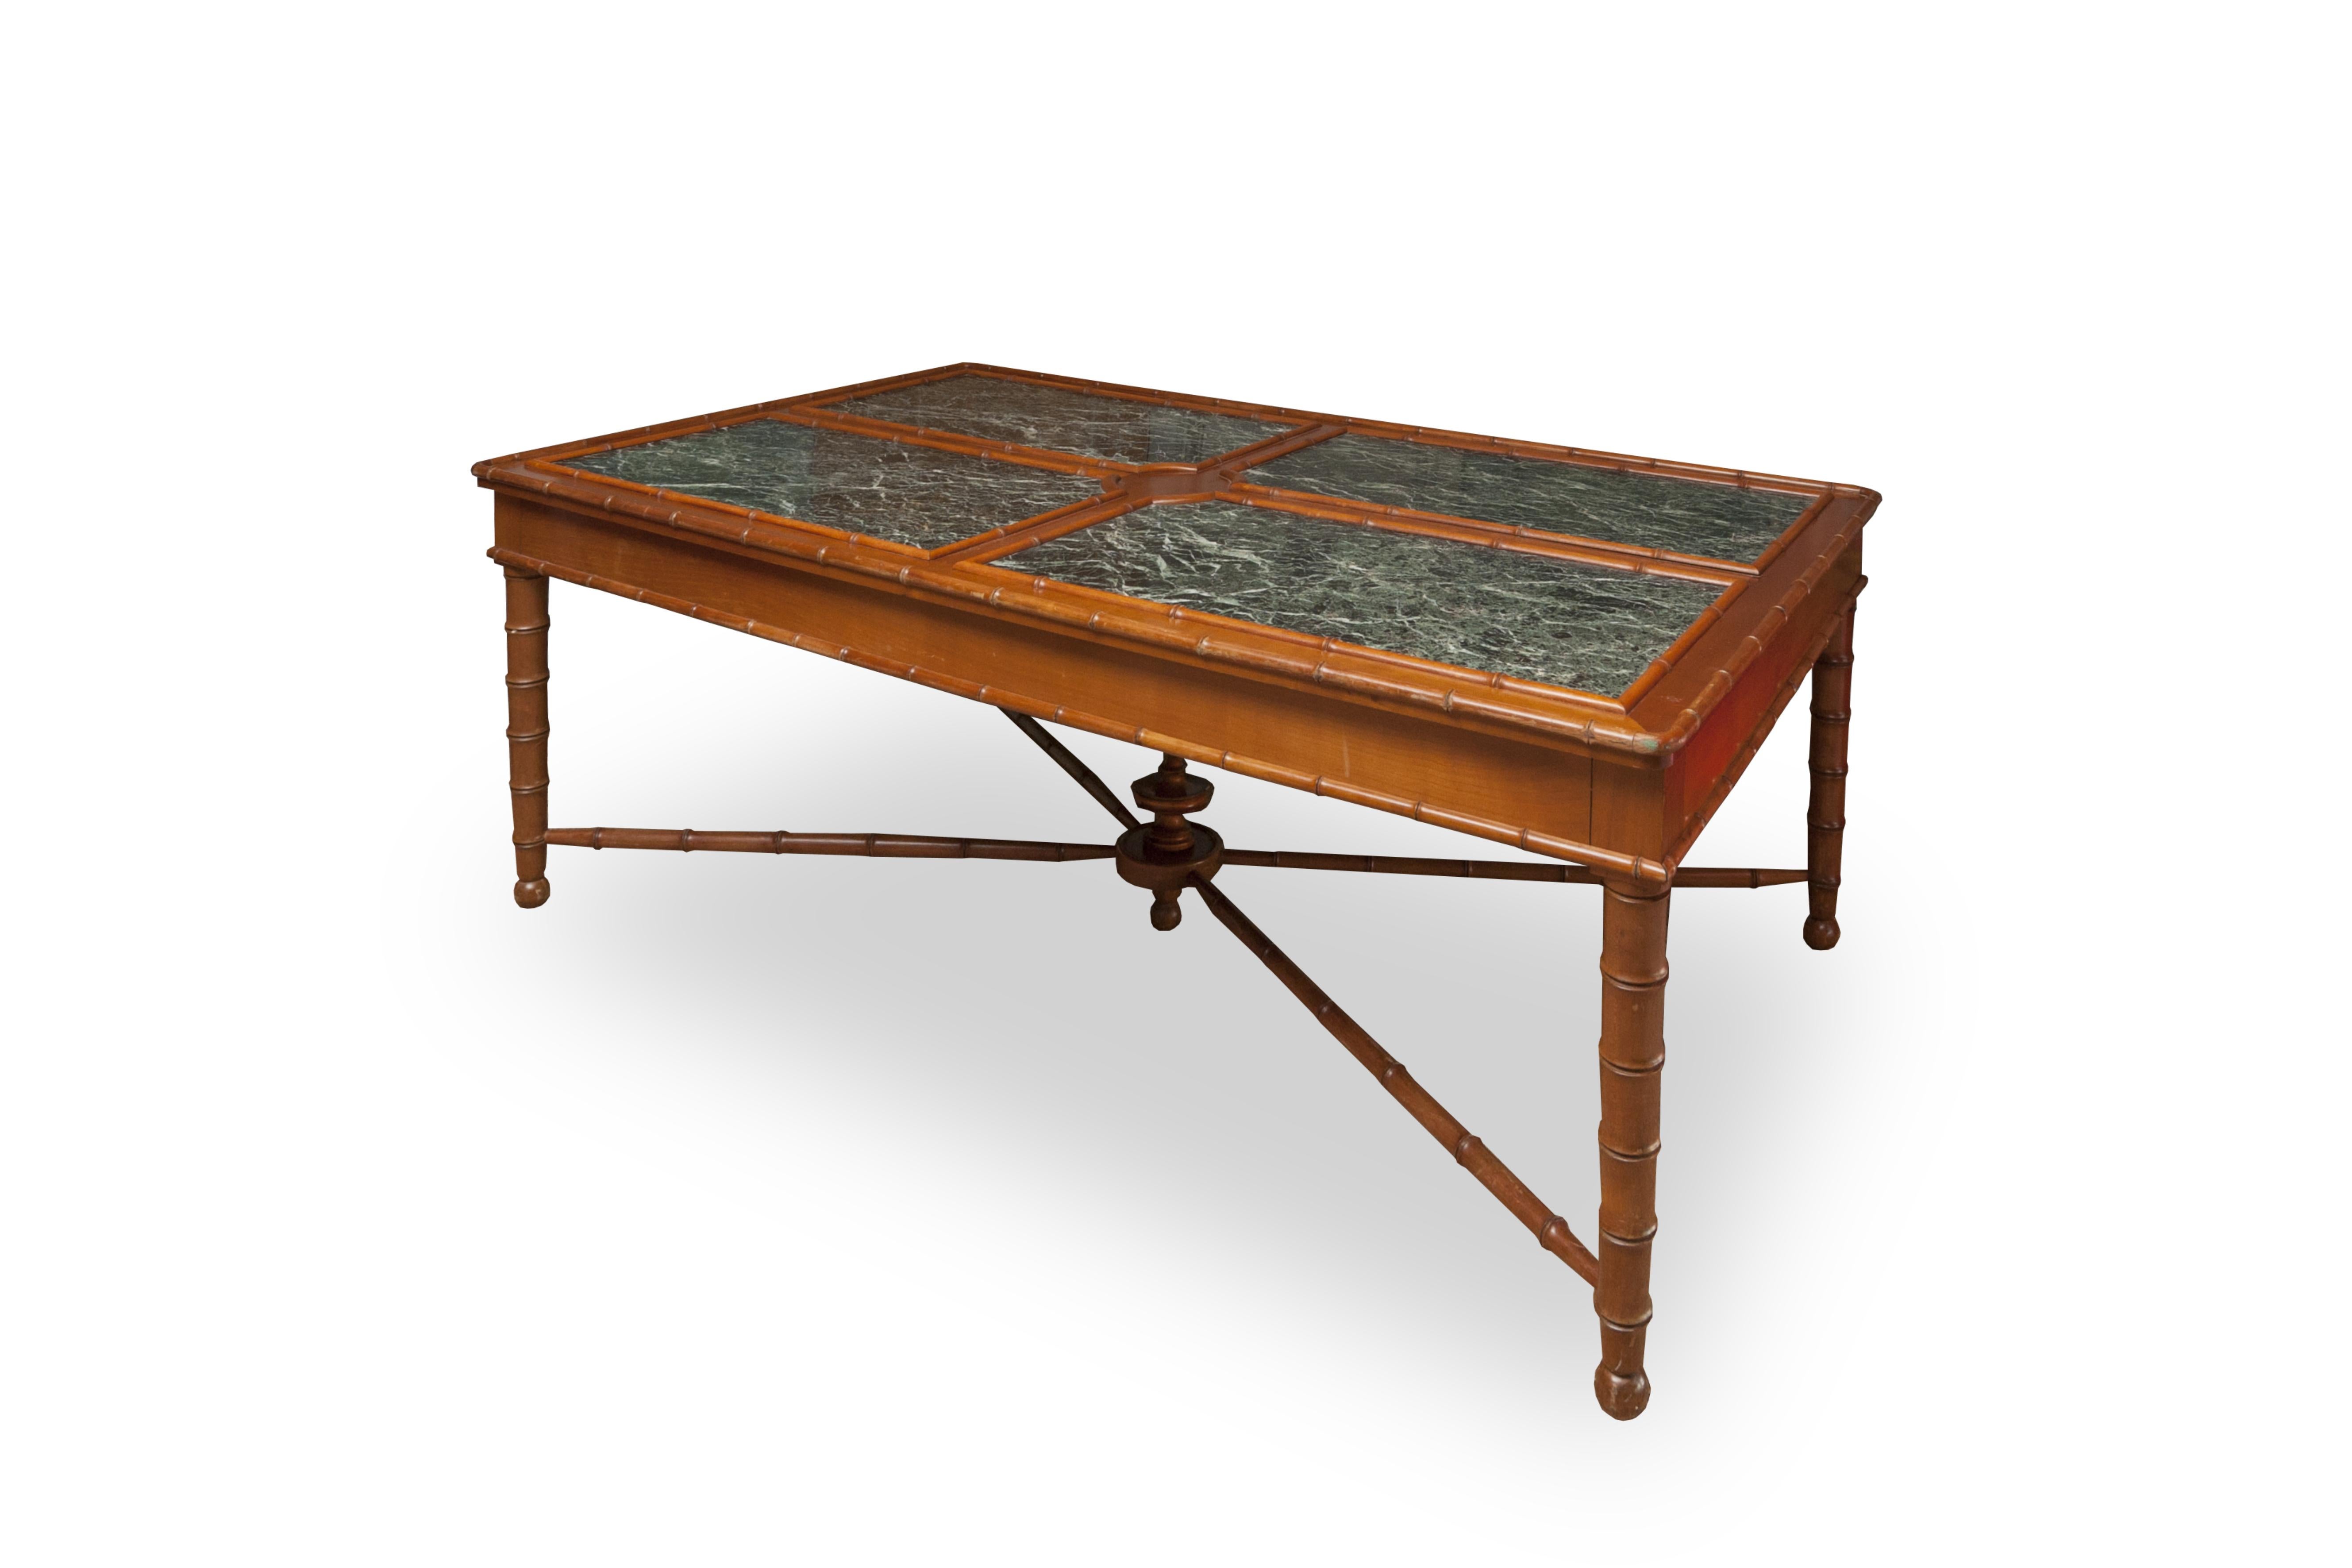 Large wooden presentation table, whose elements are carved in the shape of bamboo. This table was obviously designed from the very beginning to present quality objects. 

Indeed, its top is organized in four parts plated with green marble around